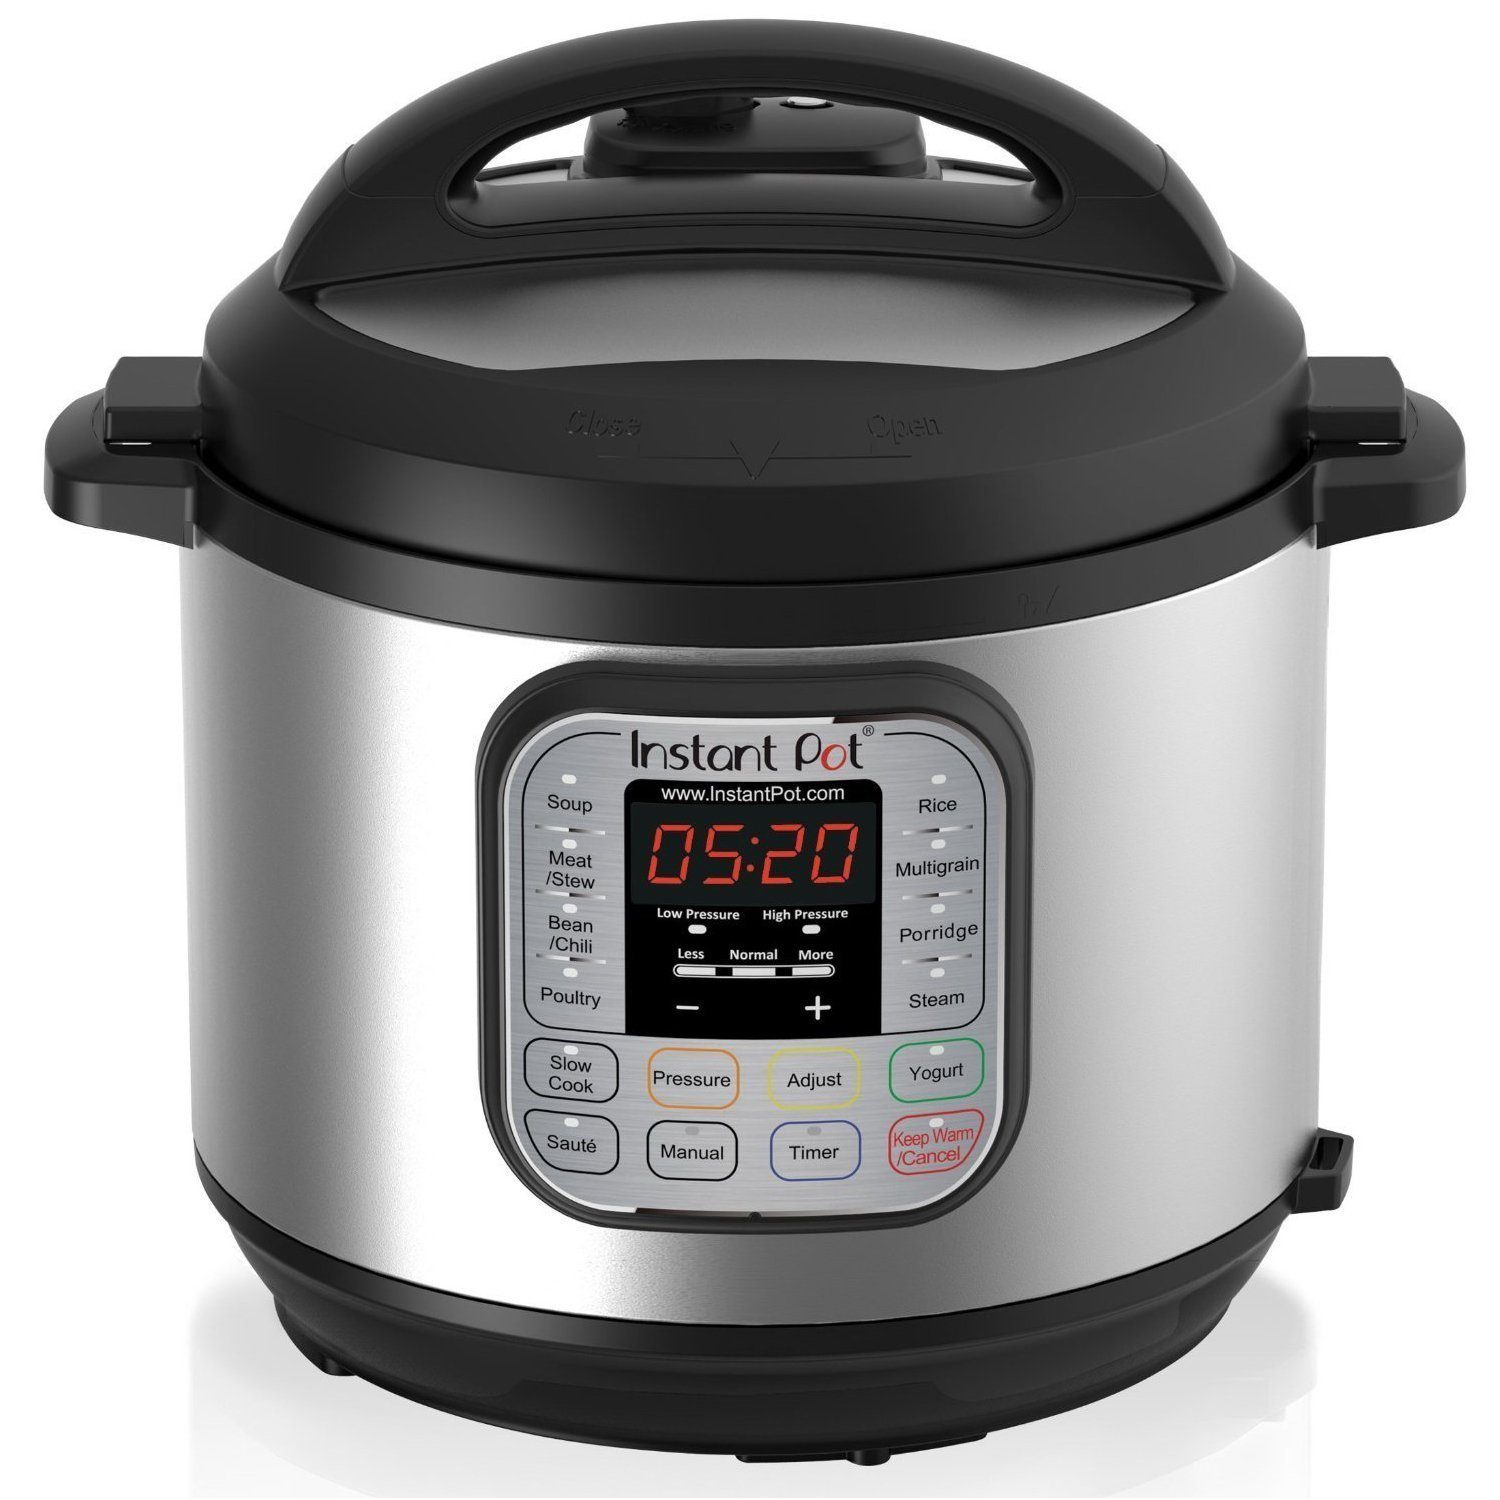 Cook Healthy Meals Under 15 Minutes With These 10 Smart Products